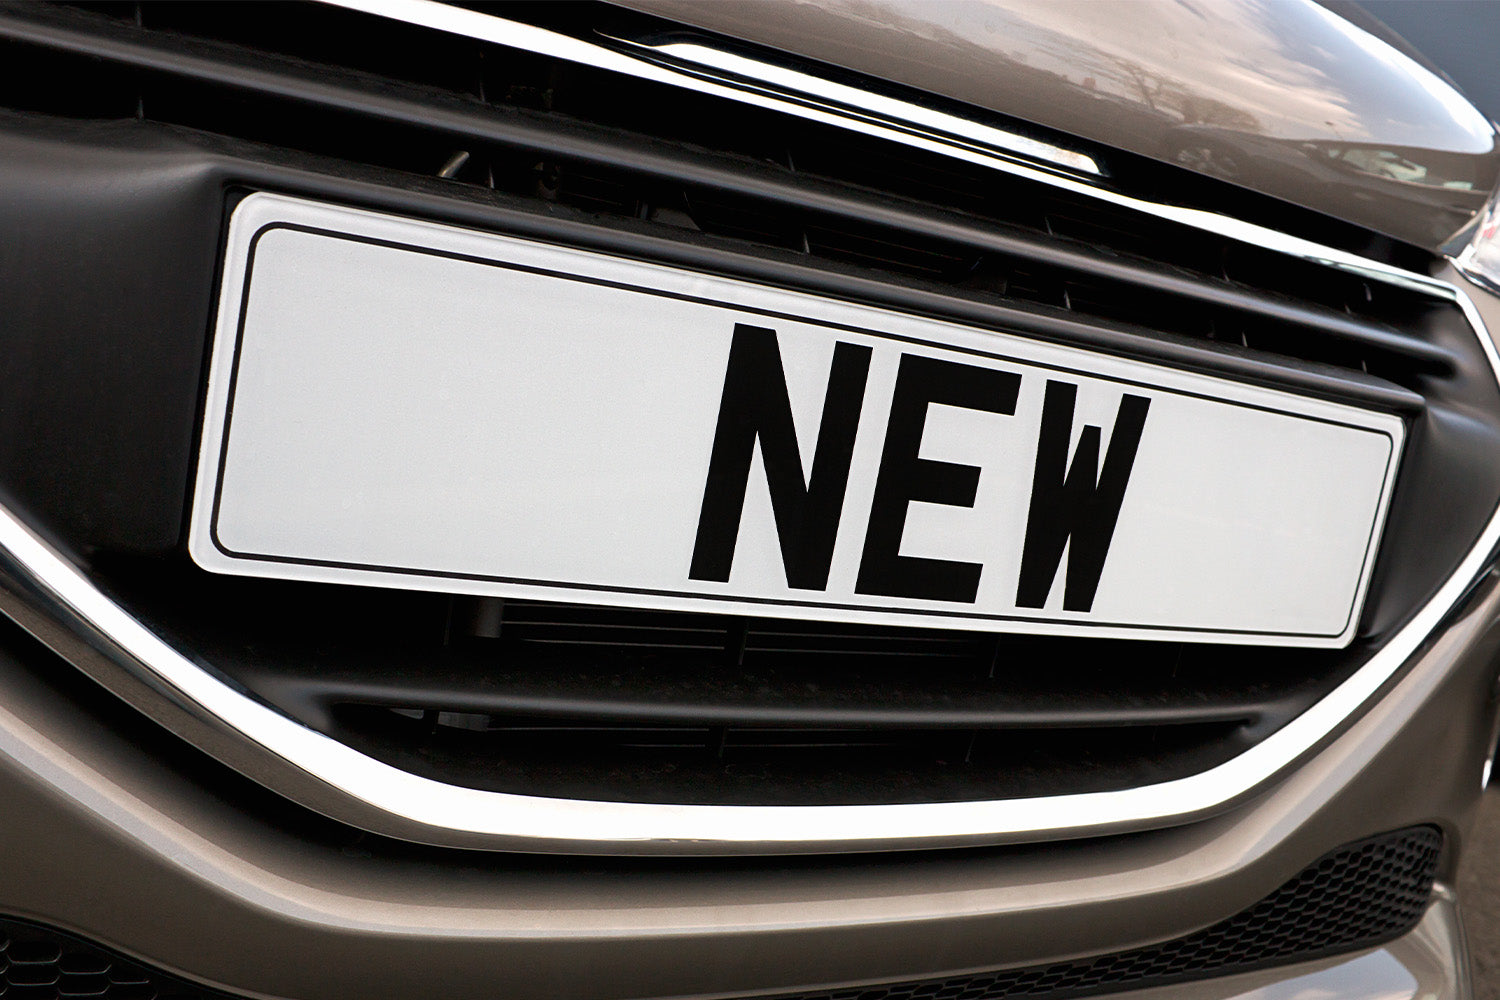 What Documents Do I Need for a Replacement Number Plate? - Jacques-specialists